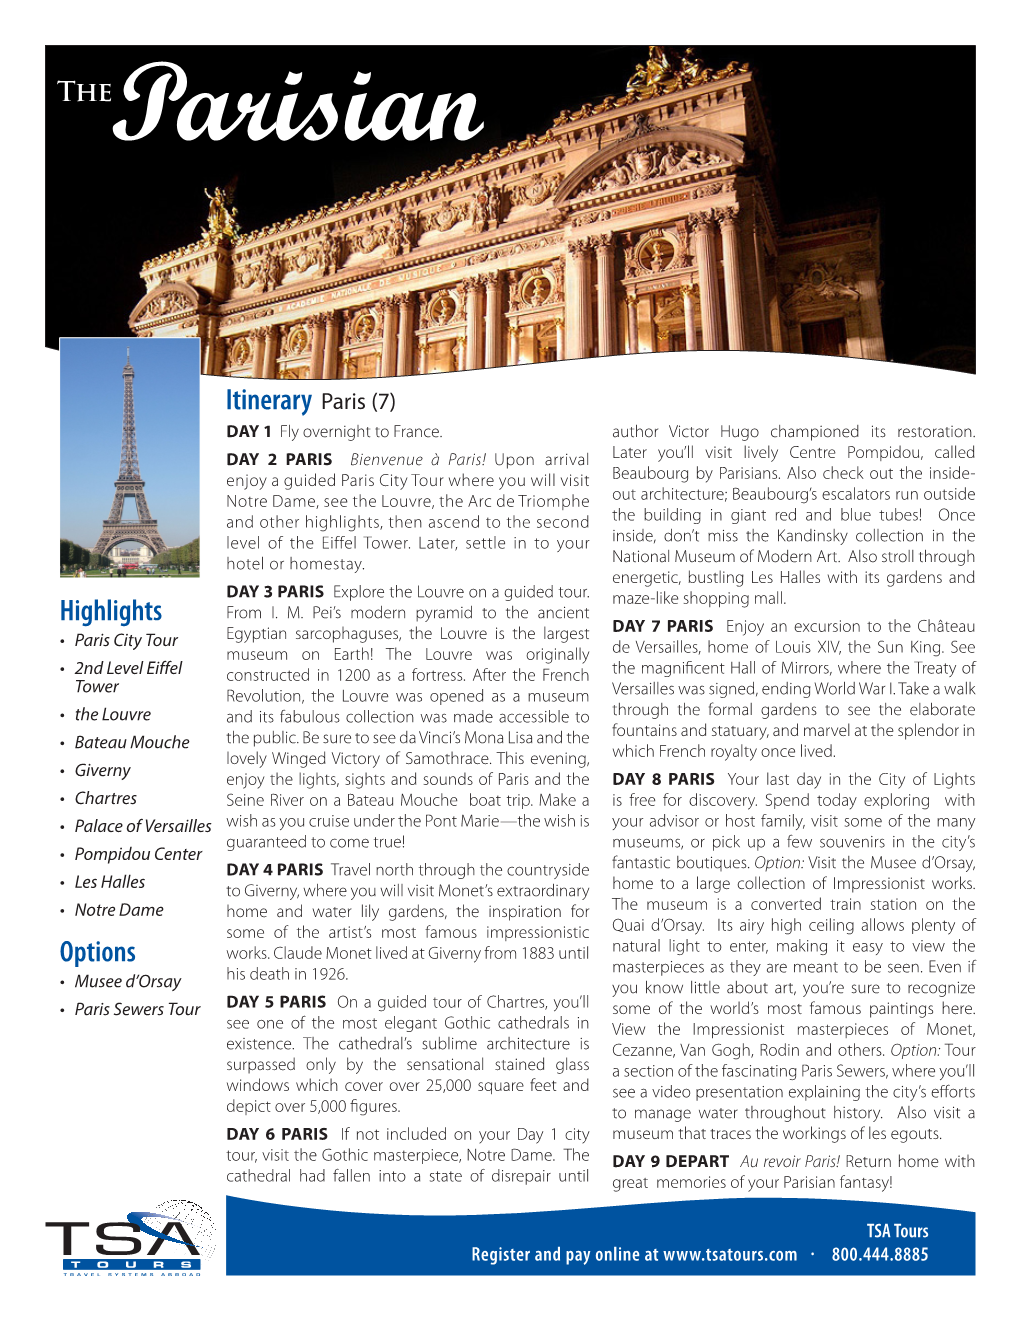 Itinerary Paris (7) DAY 1 Fly Overnight to France